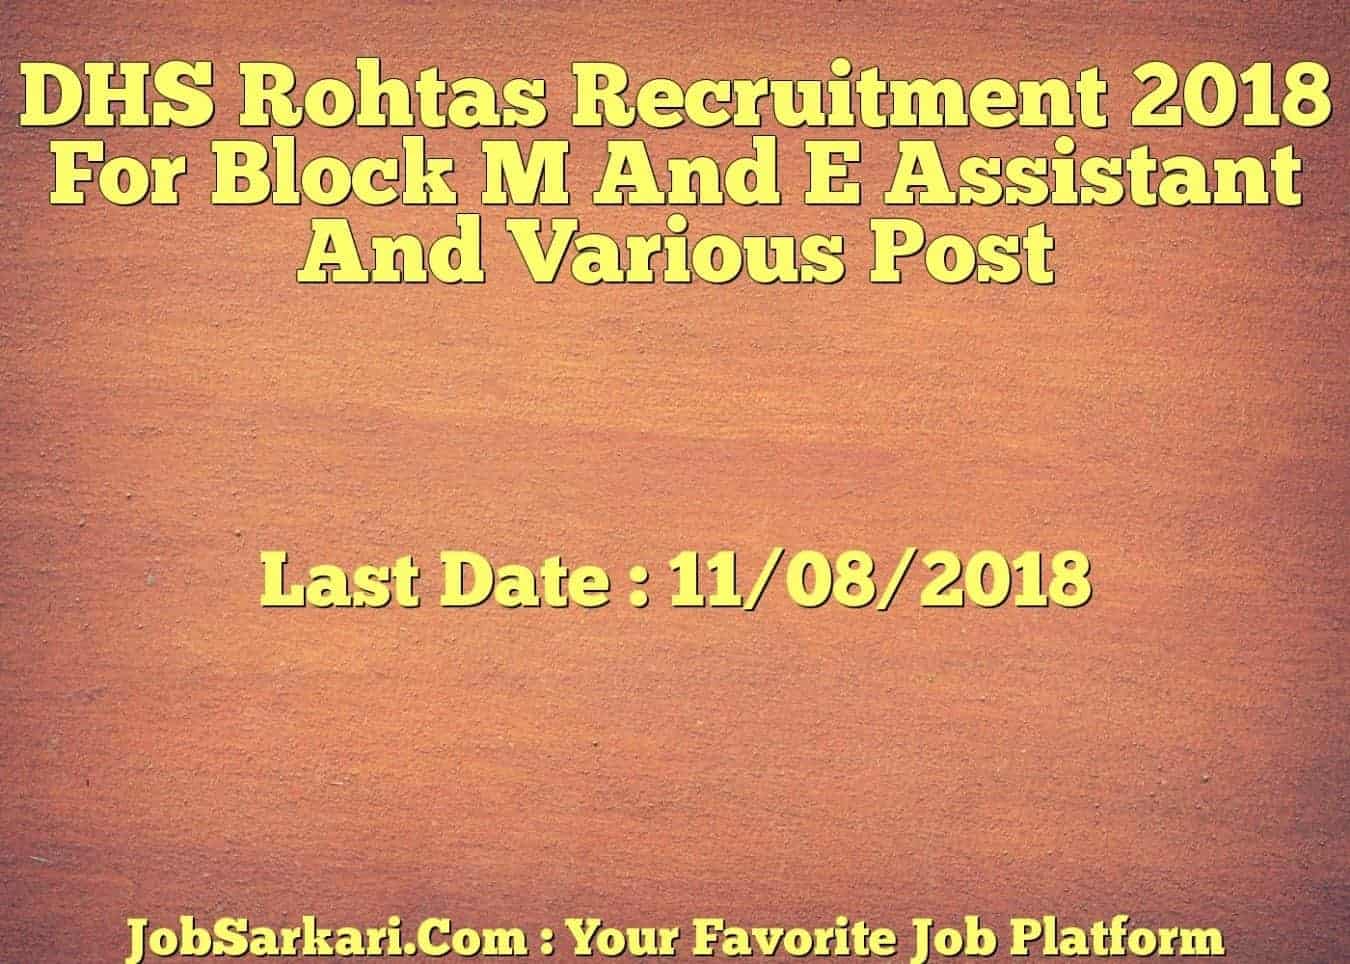 DHS Rohtas Recruitment 2018 For Block M And E Assistant And Various Post